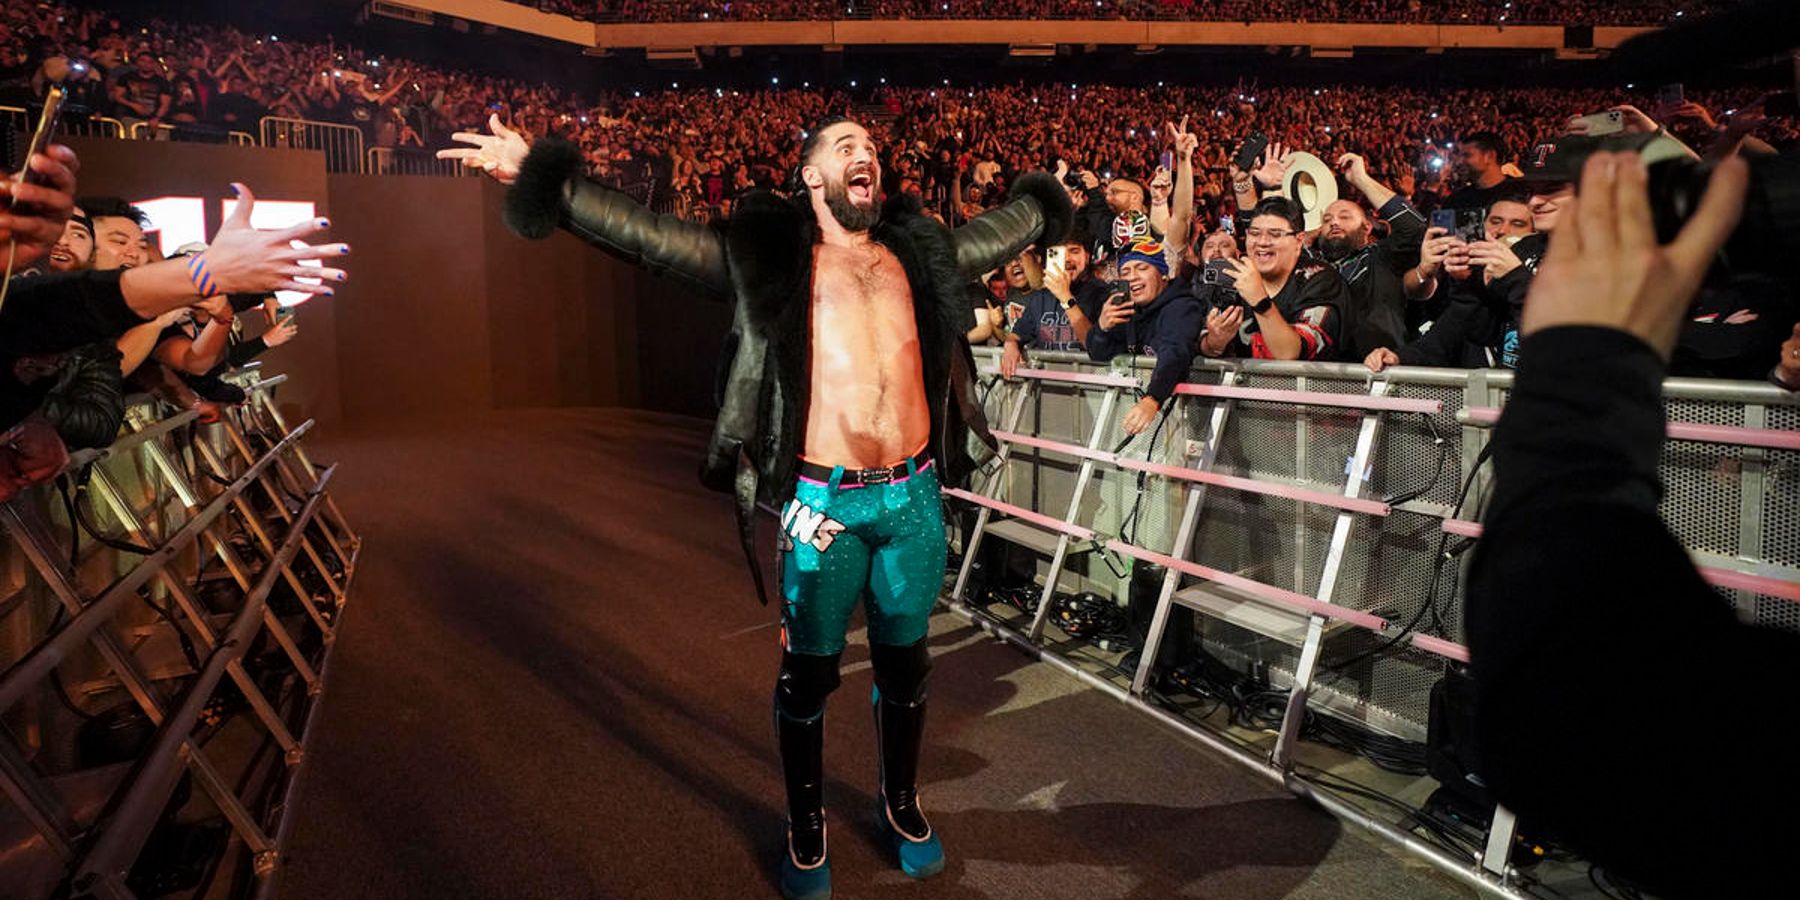 Seth Rollins plays to the crowd as he makes his entrance during WWE's 2023 Royal Rumble premium live event.